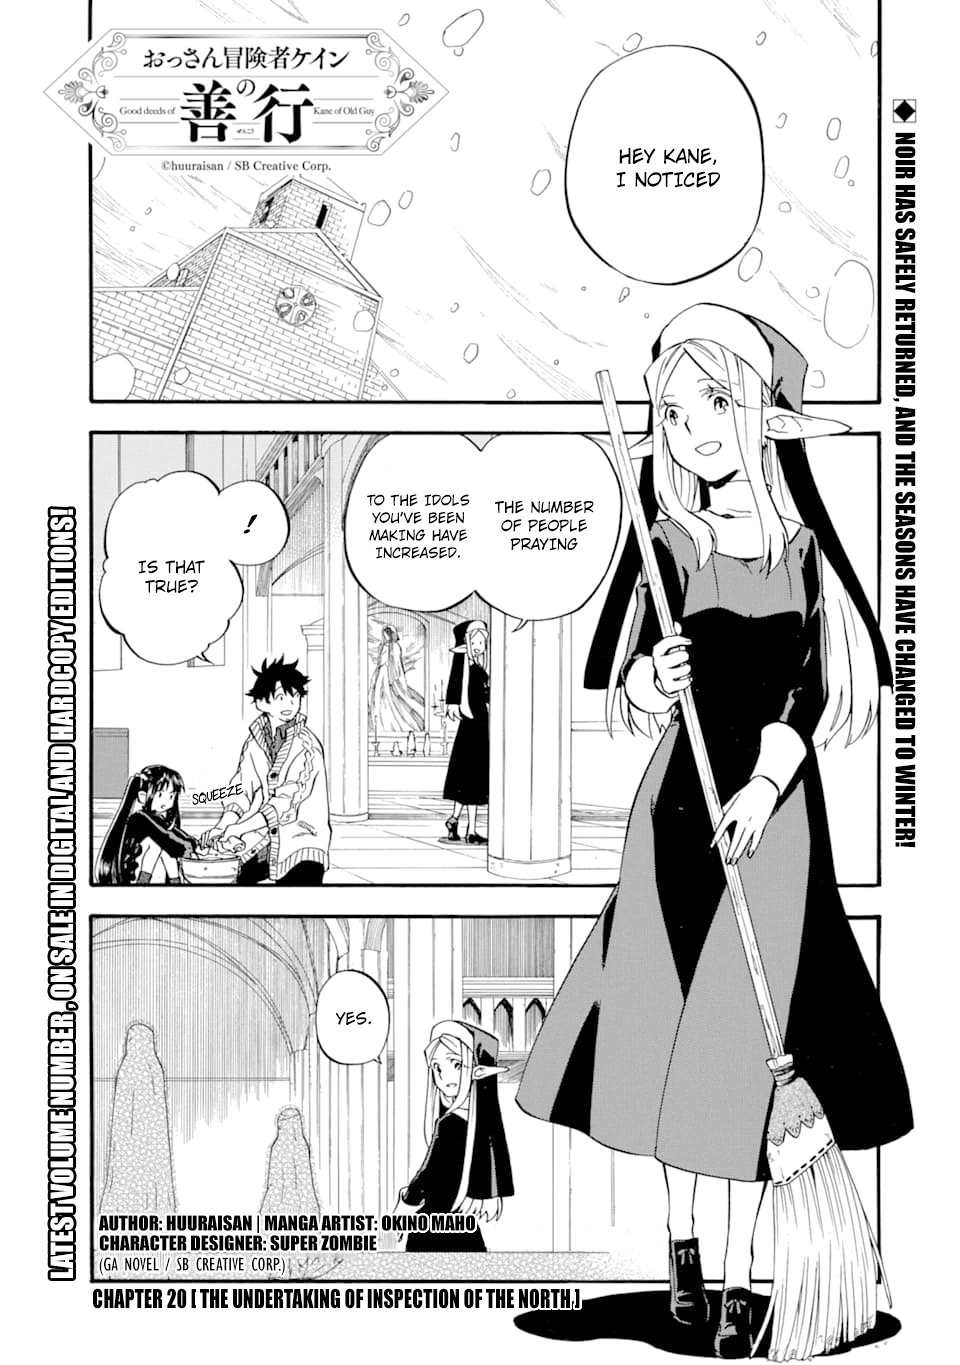 Good Deeds Of Kane Of Old Guy Vol.5 Chapter 20: The Undertaking Of Inspection Of The North - Picture 2